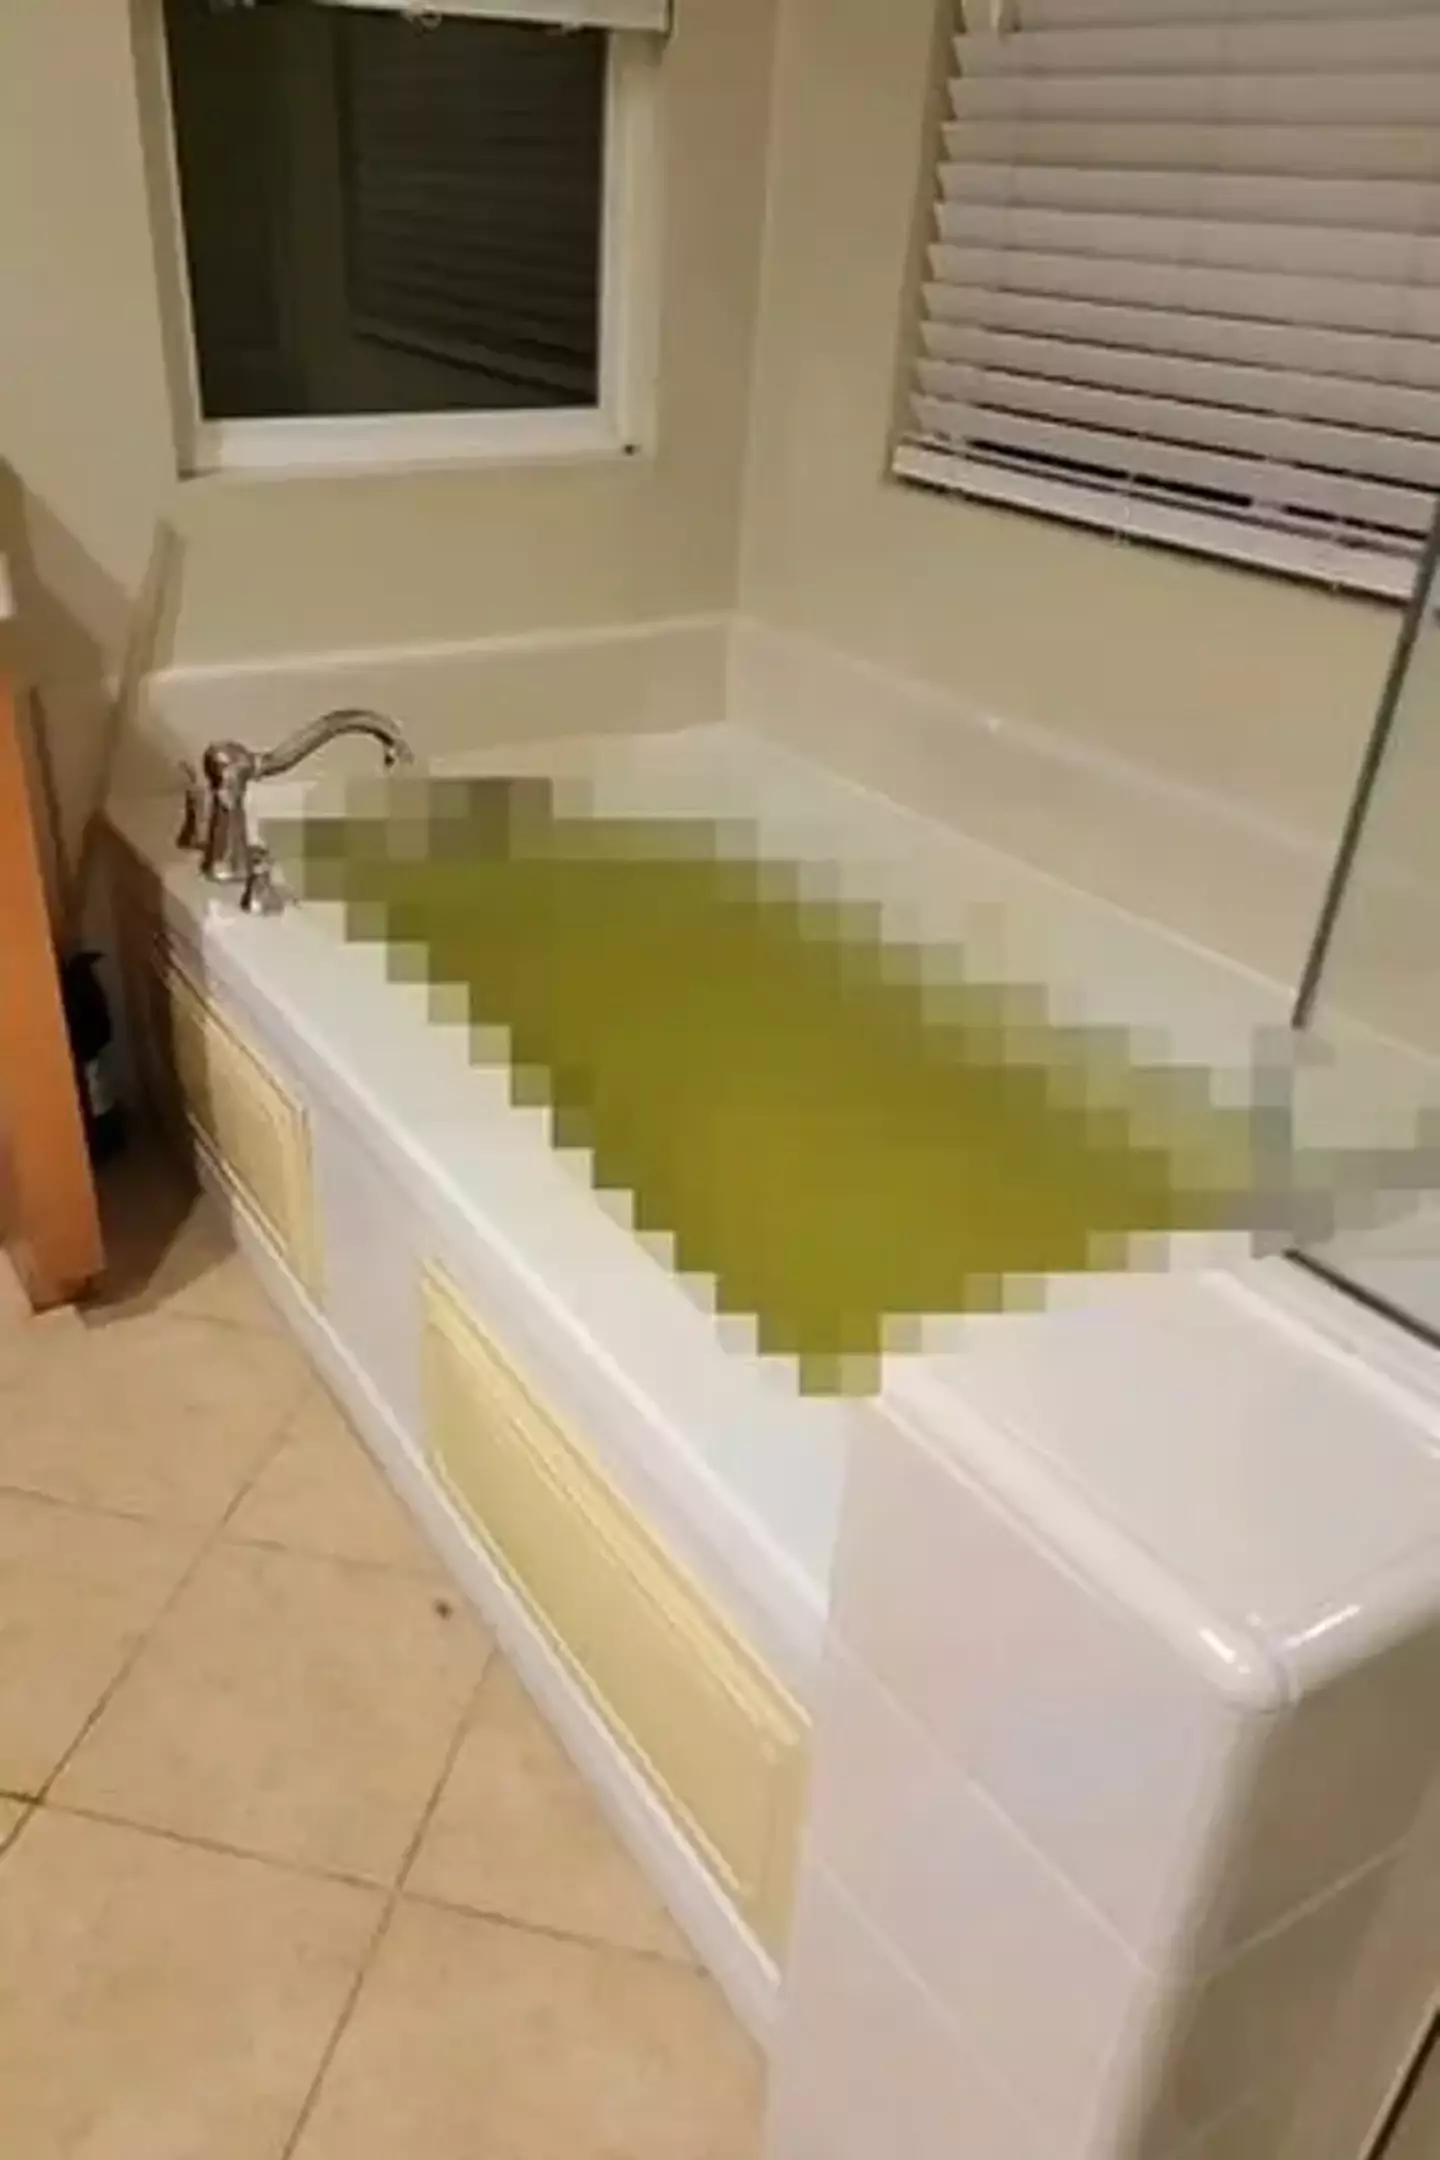 Carter's mother also shared a picture of the bathtub he was found dead in.